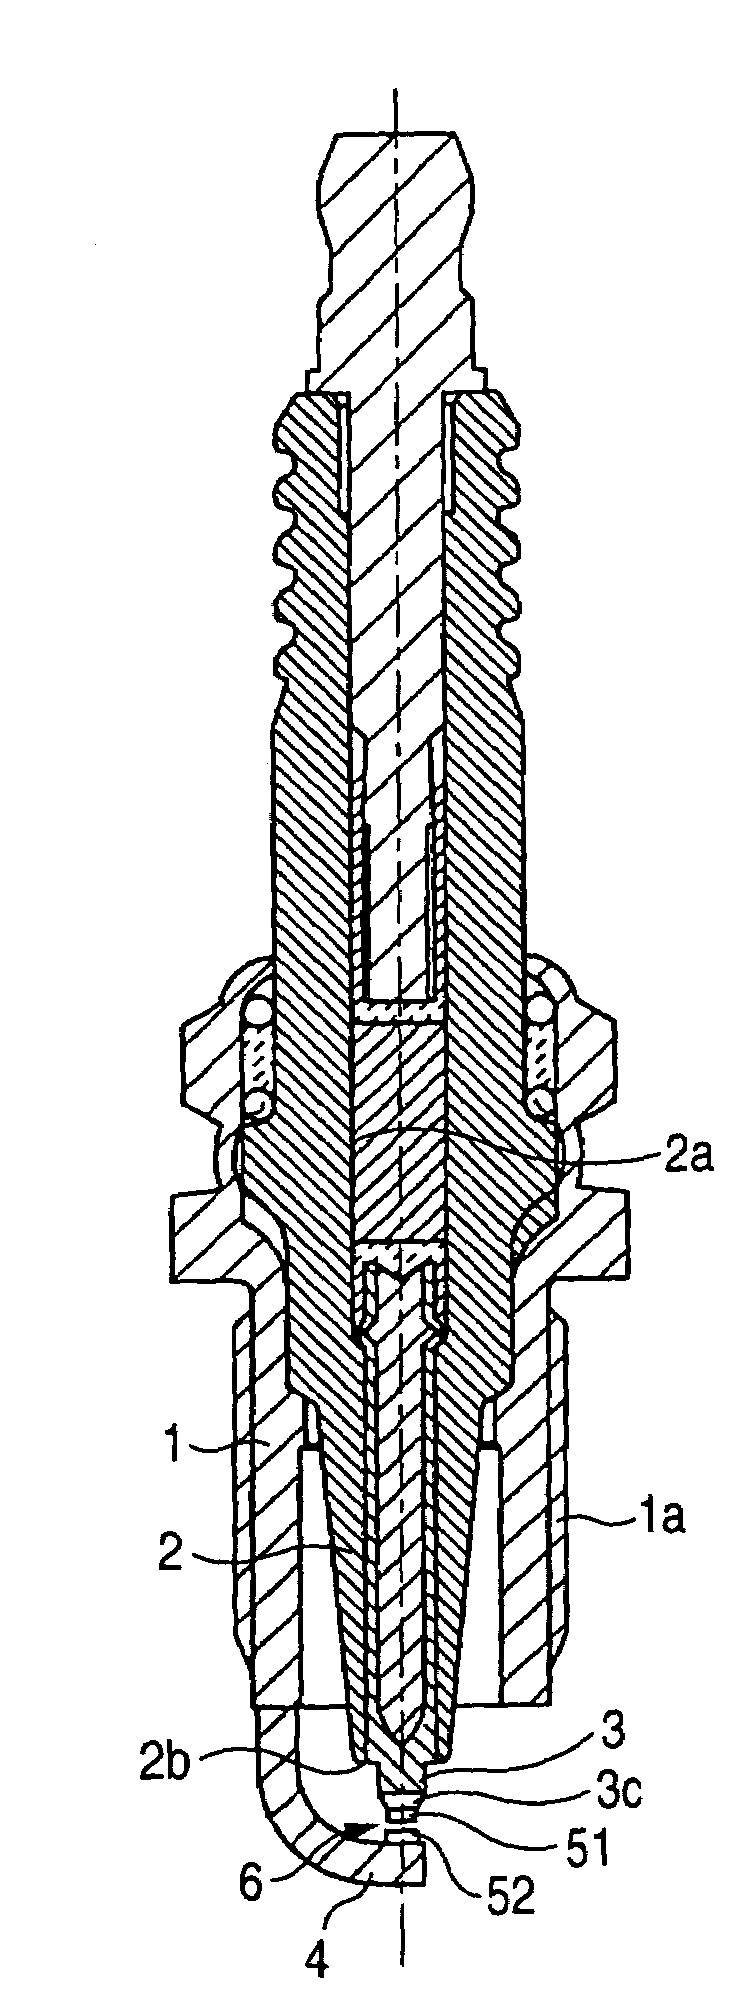 Spark plug having a specific structure of noble metal tip on ground electrode